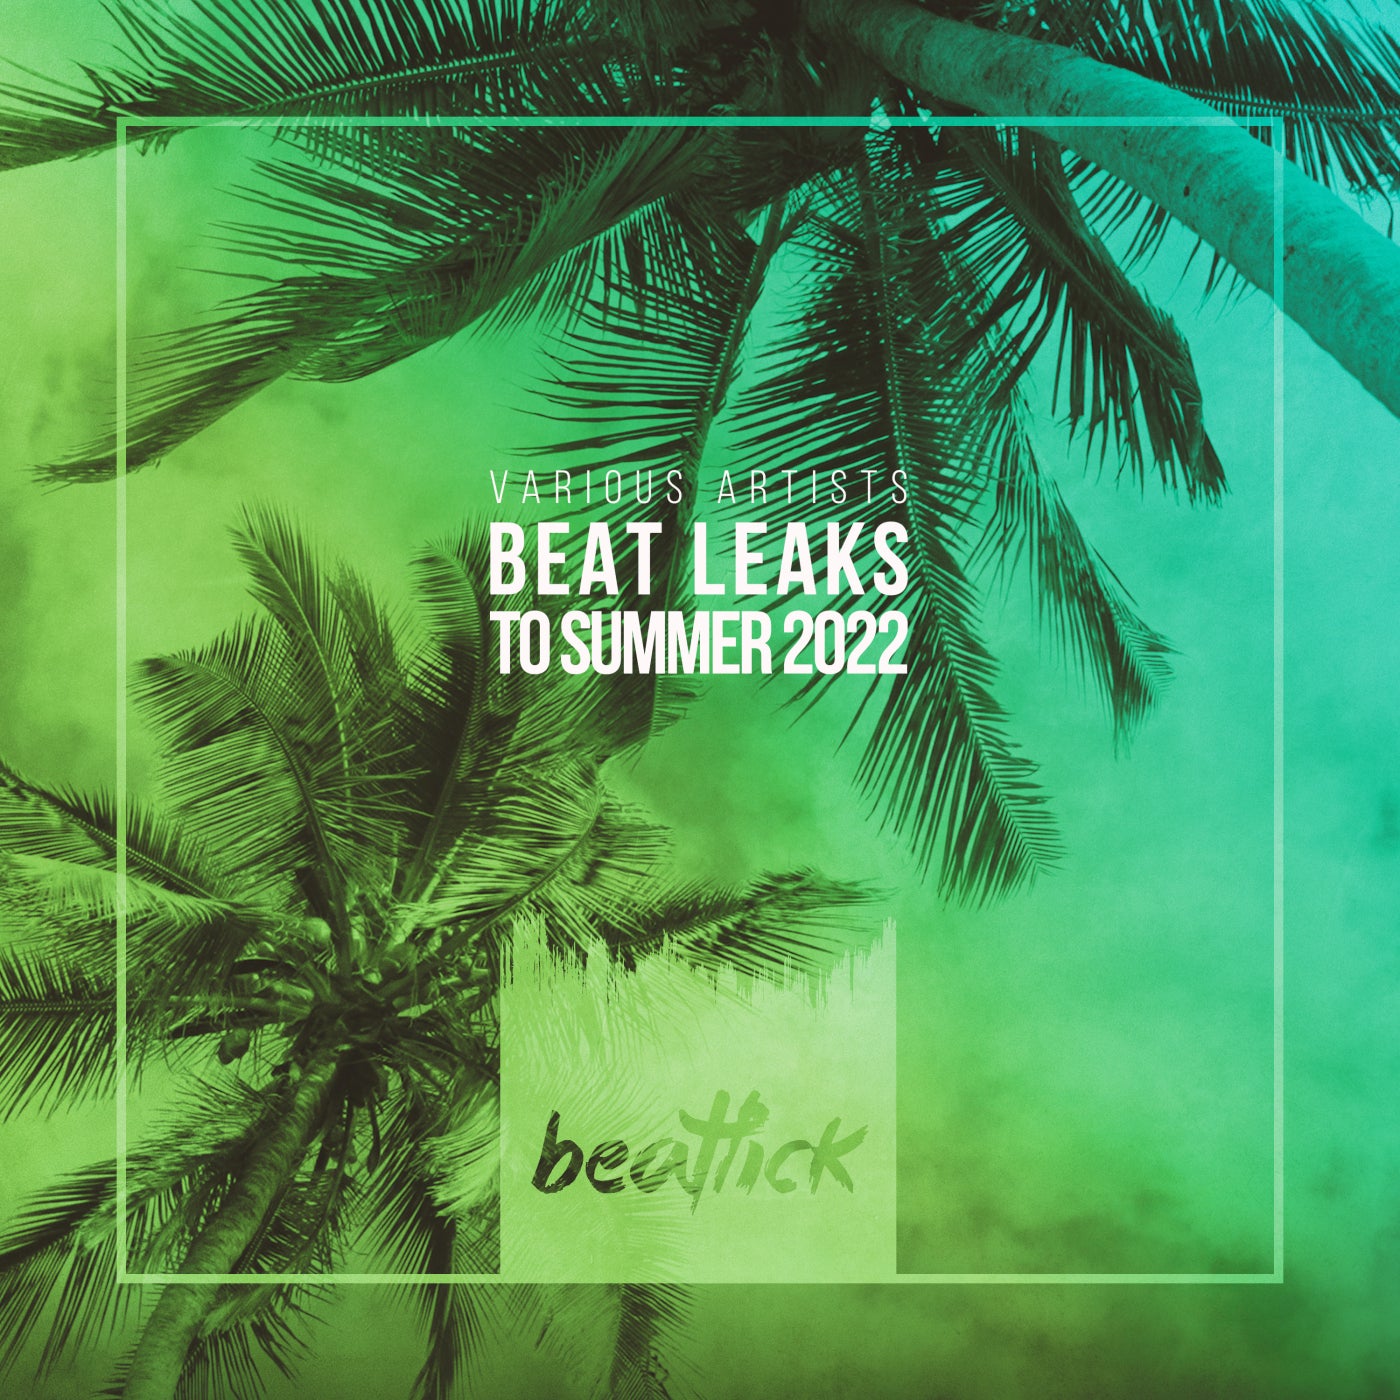 Beat Leaks to Summer 2022